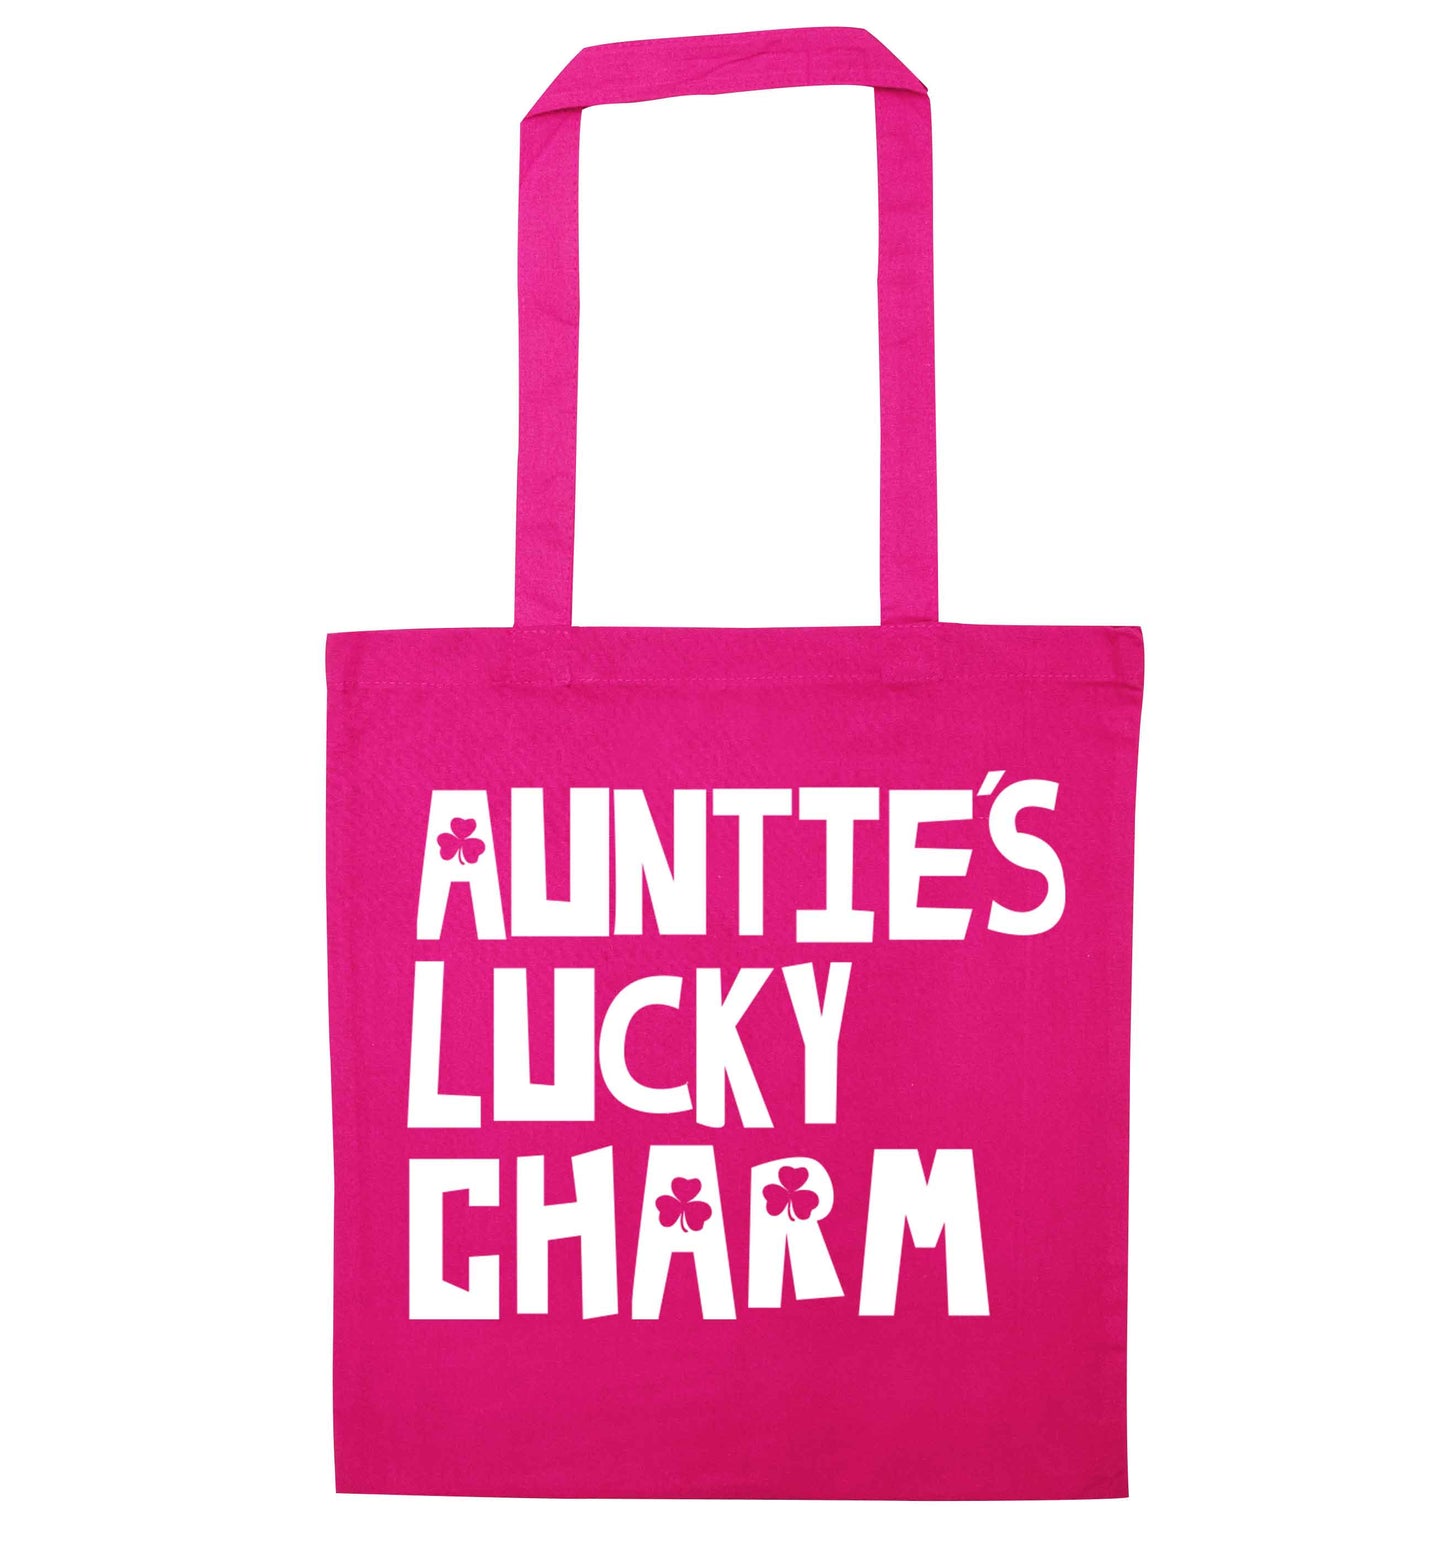 Auntie's lucky charm pink tote bag